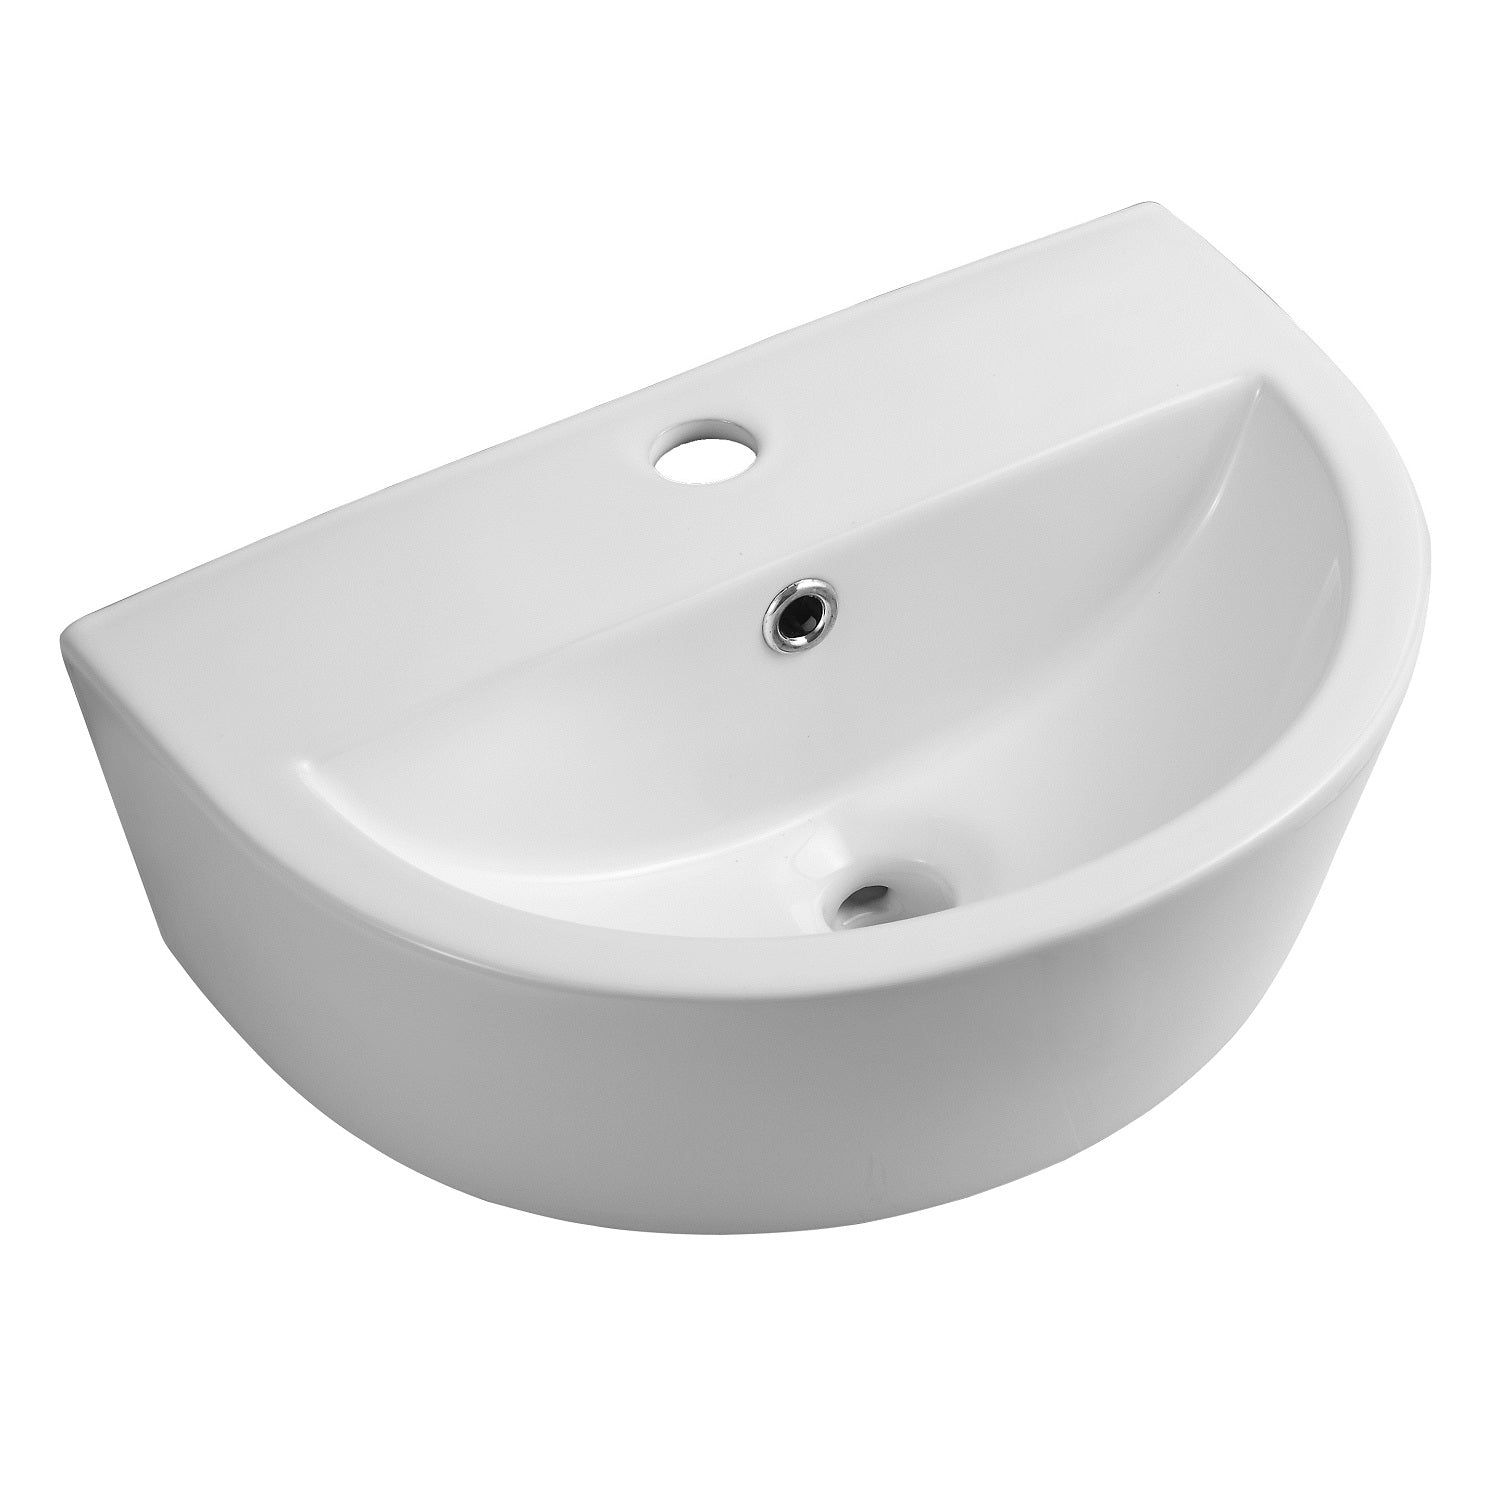 Modern Curved Ceramic Wall Hung Cloakroom Basin - 445mm x 330mm - Gloss White